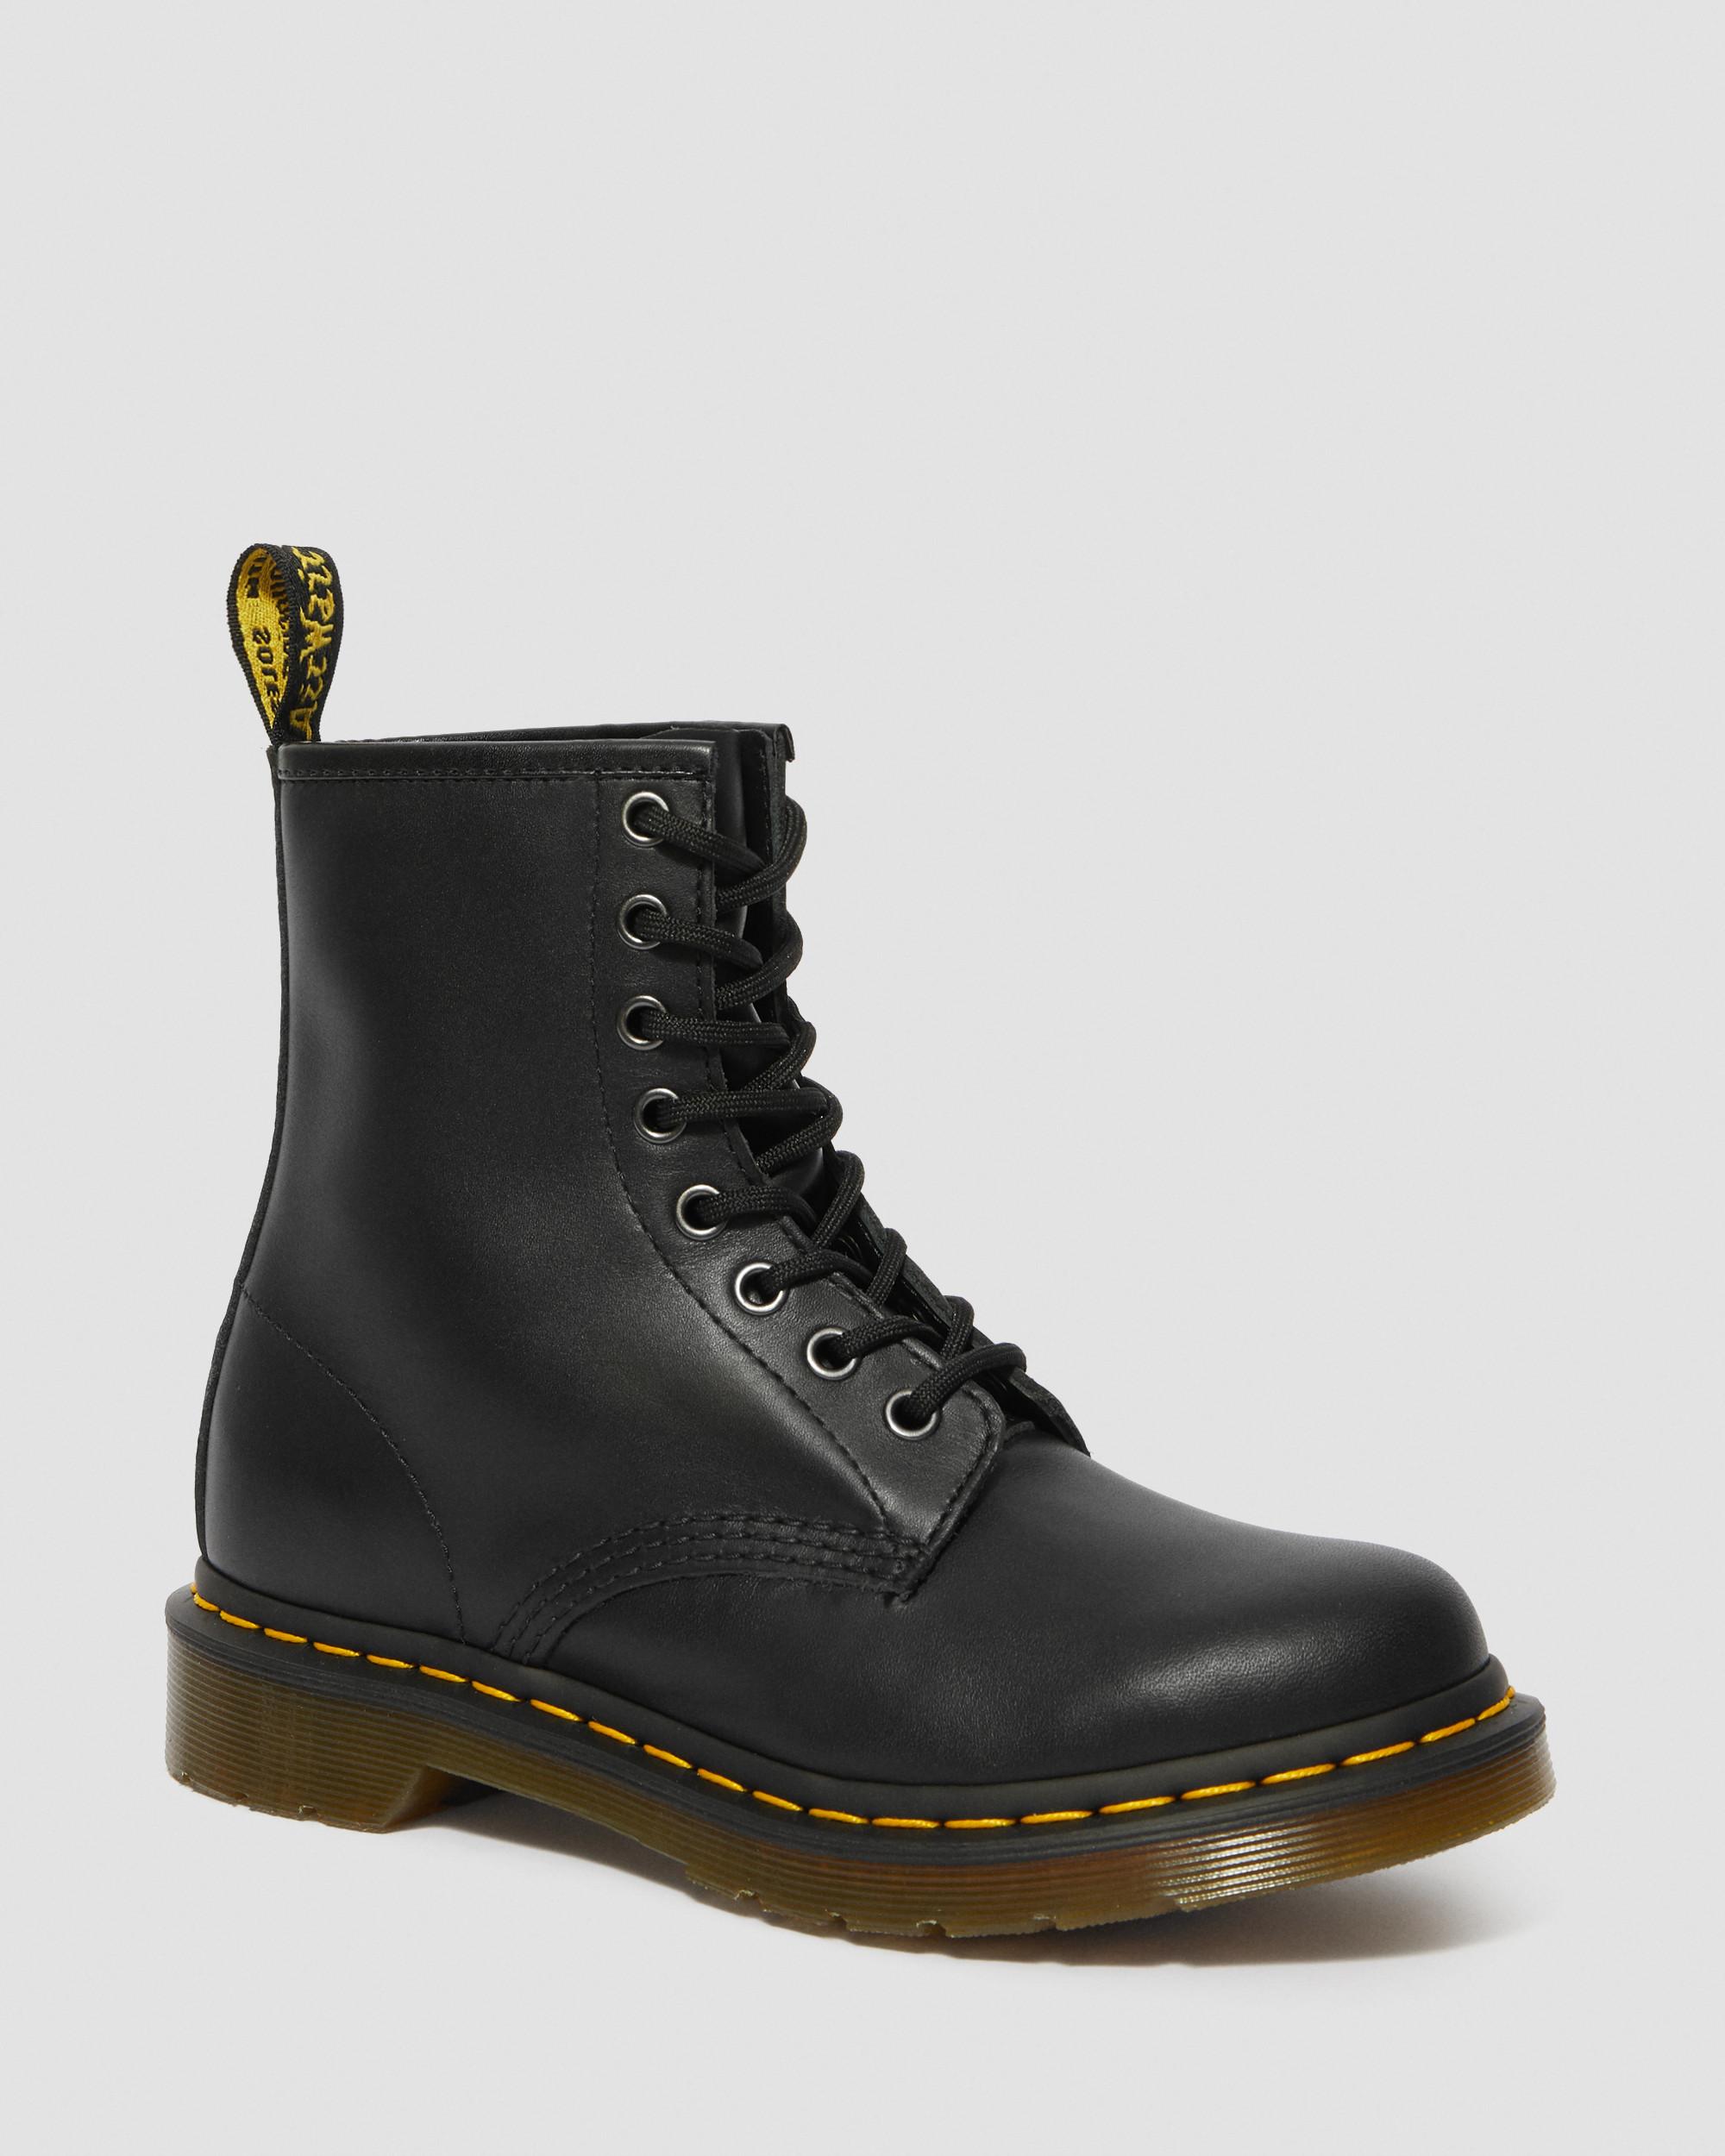 Womens | Shop Used Dr. Martens